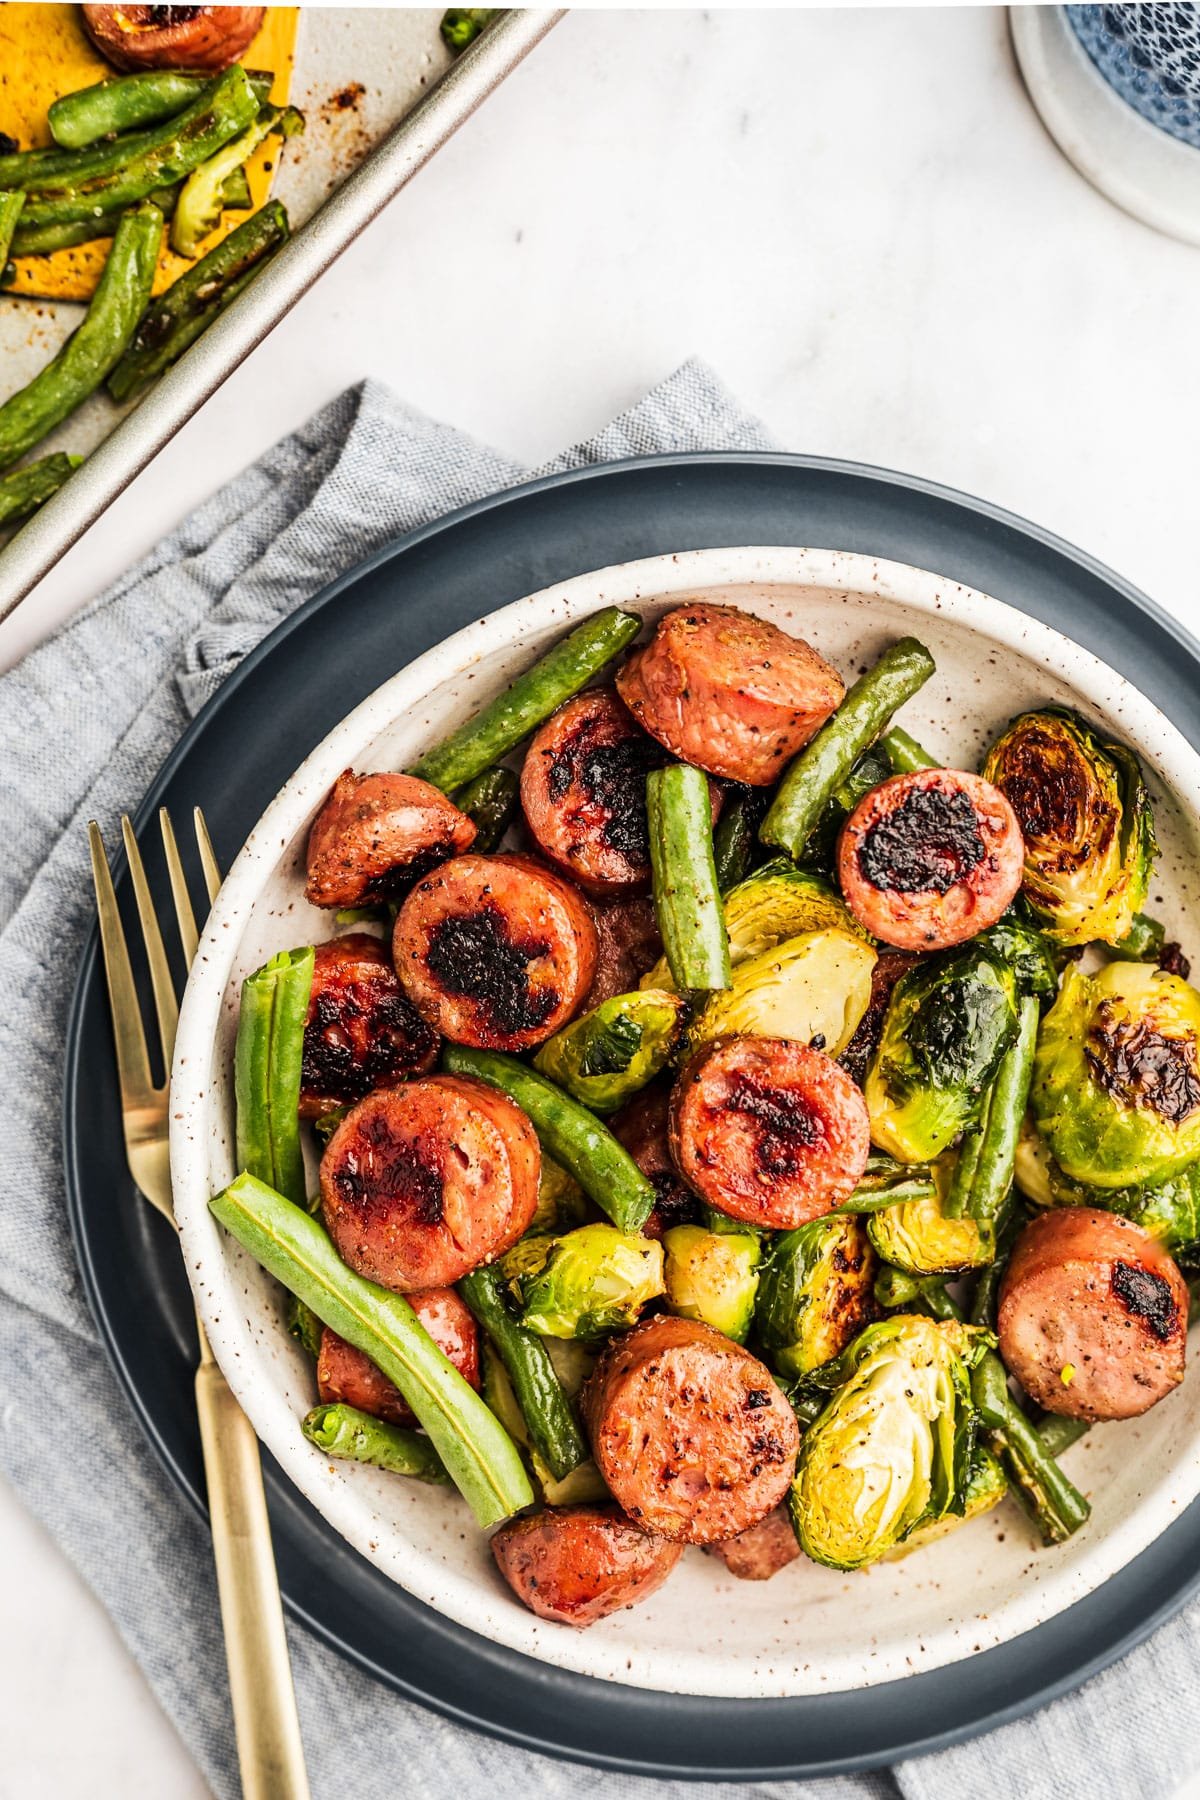 https://thewholecook.com/wp-content/uploads/2023/05/Sheet-Pan-Sausage-and-Vegetables-1-2.jpg